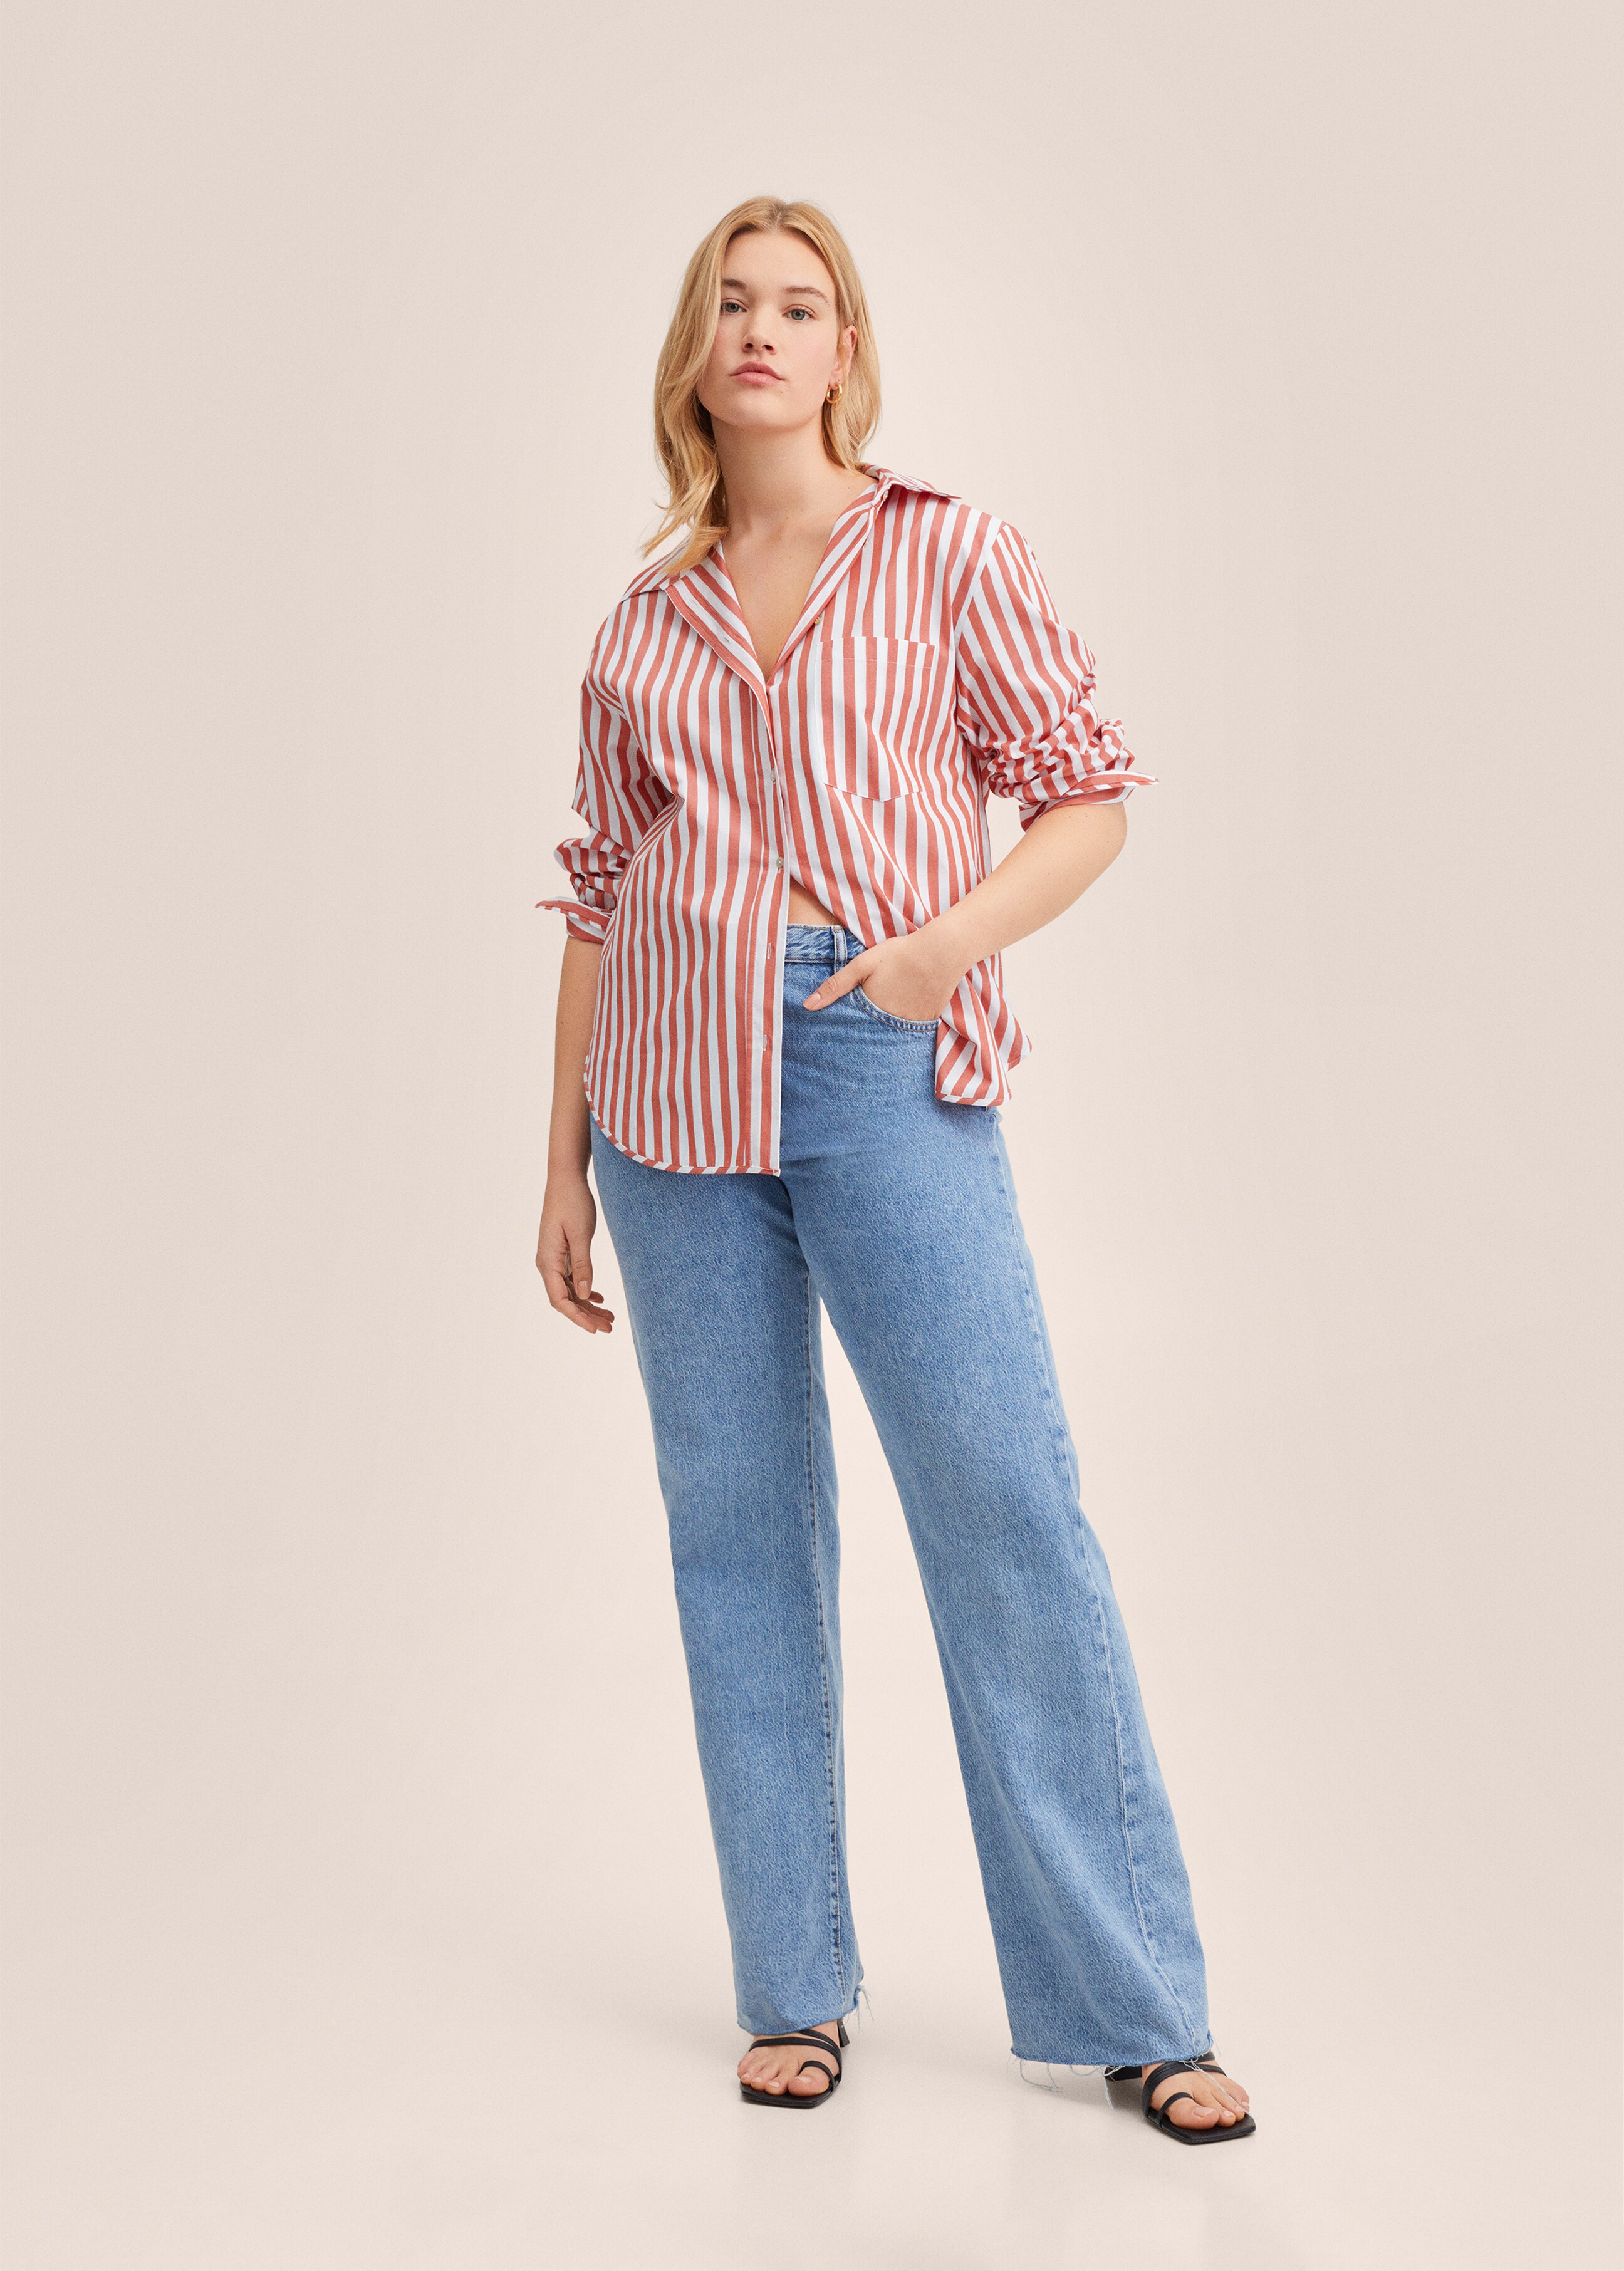 Striped cotton shirt - Details of the article 3